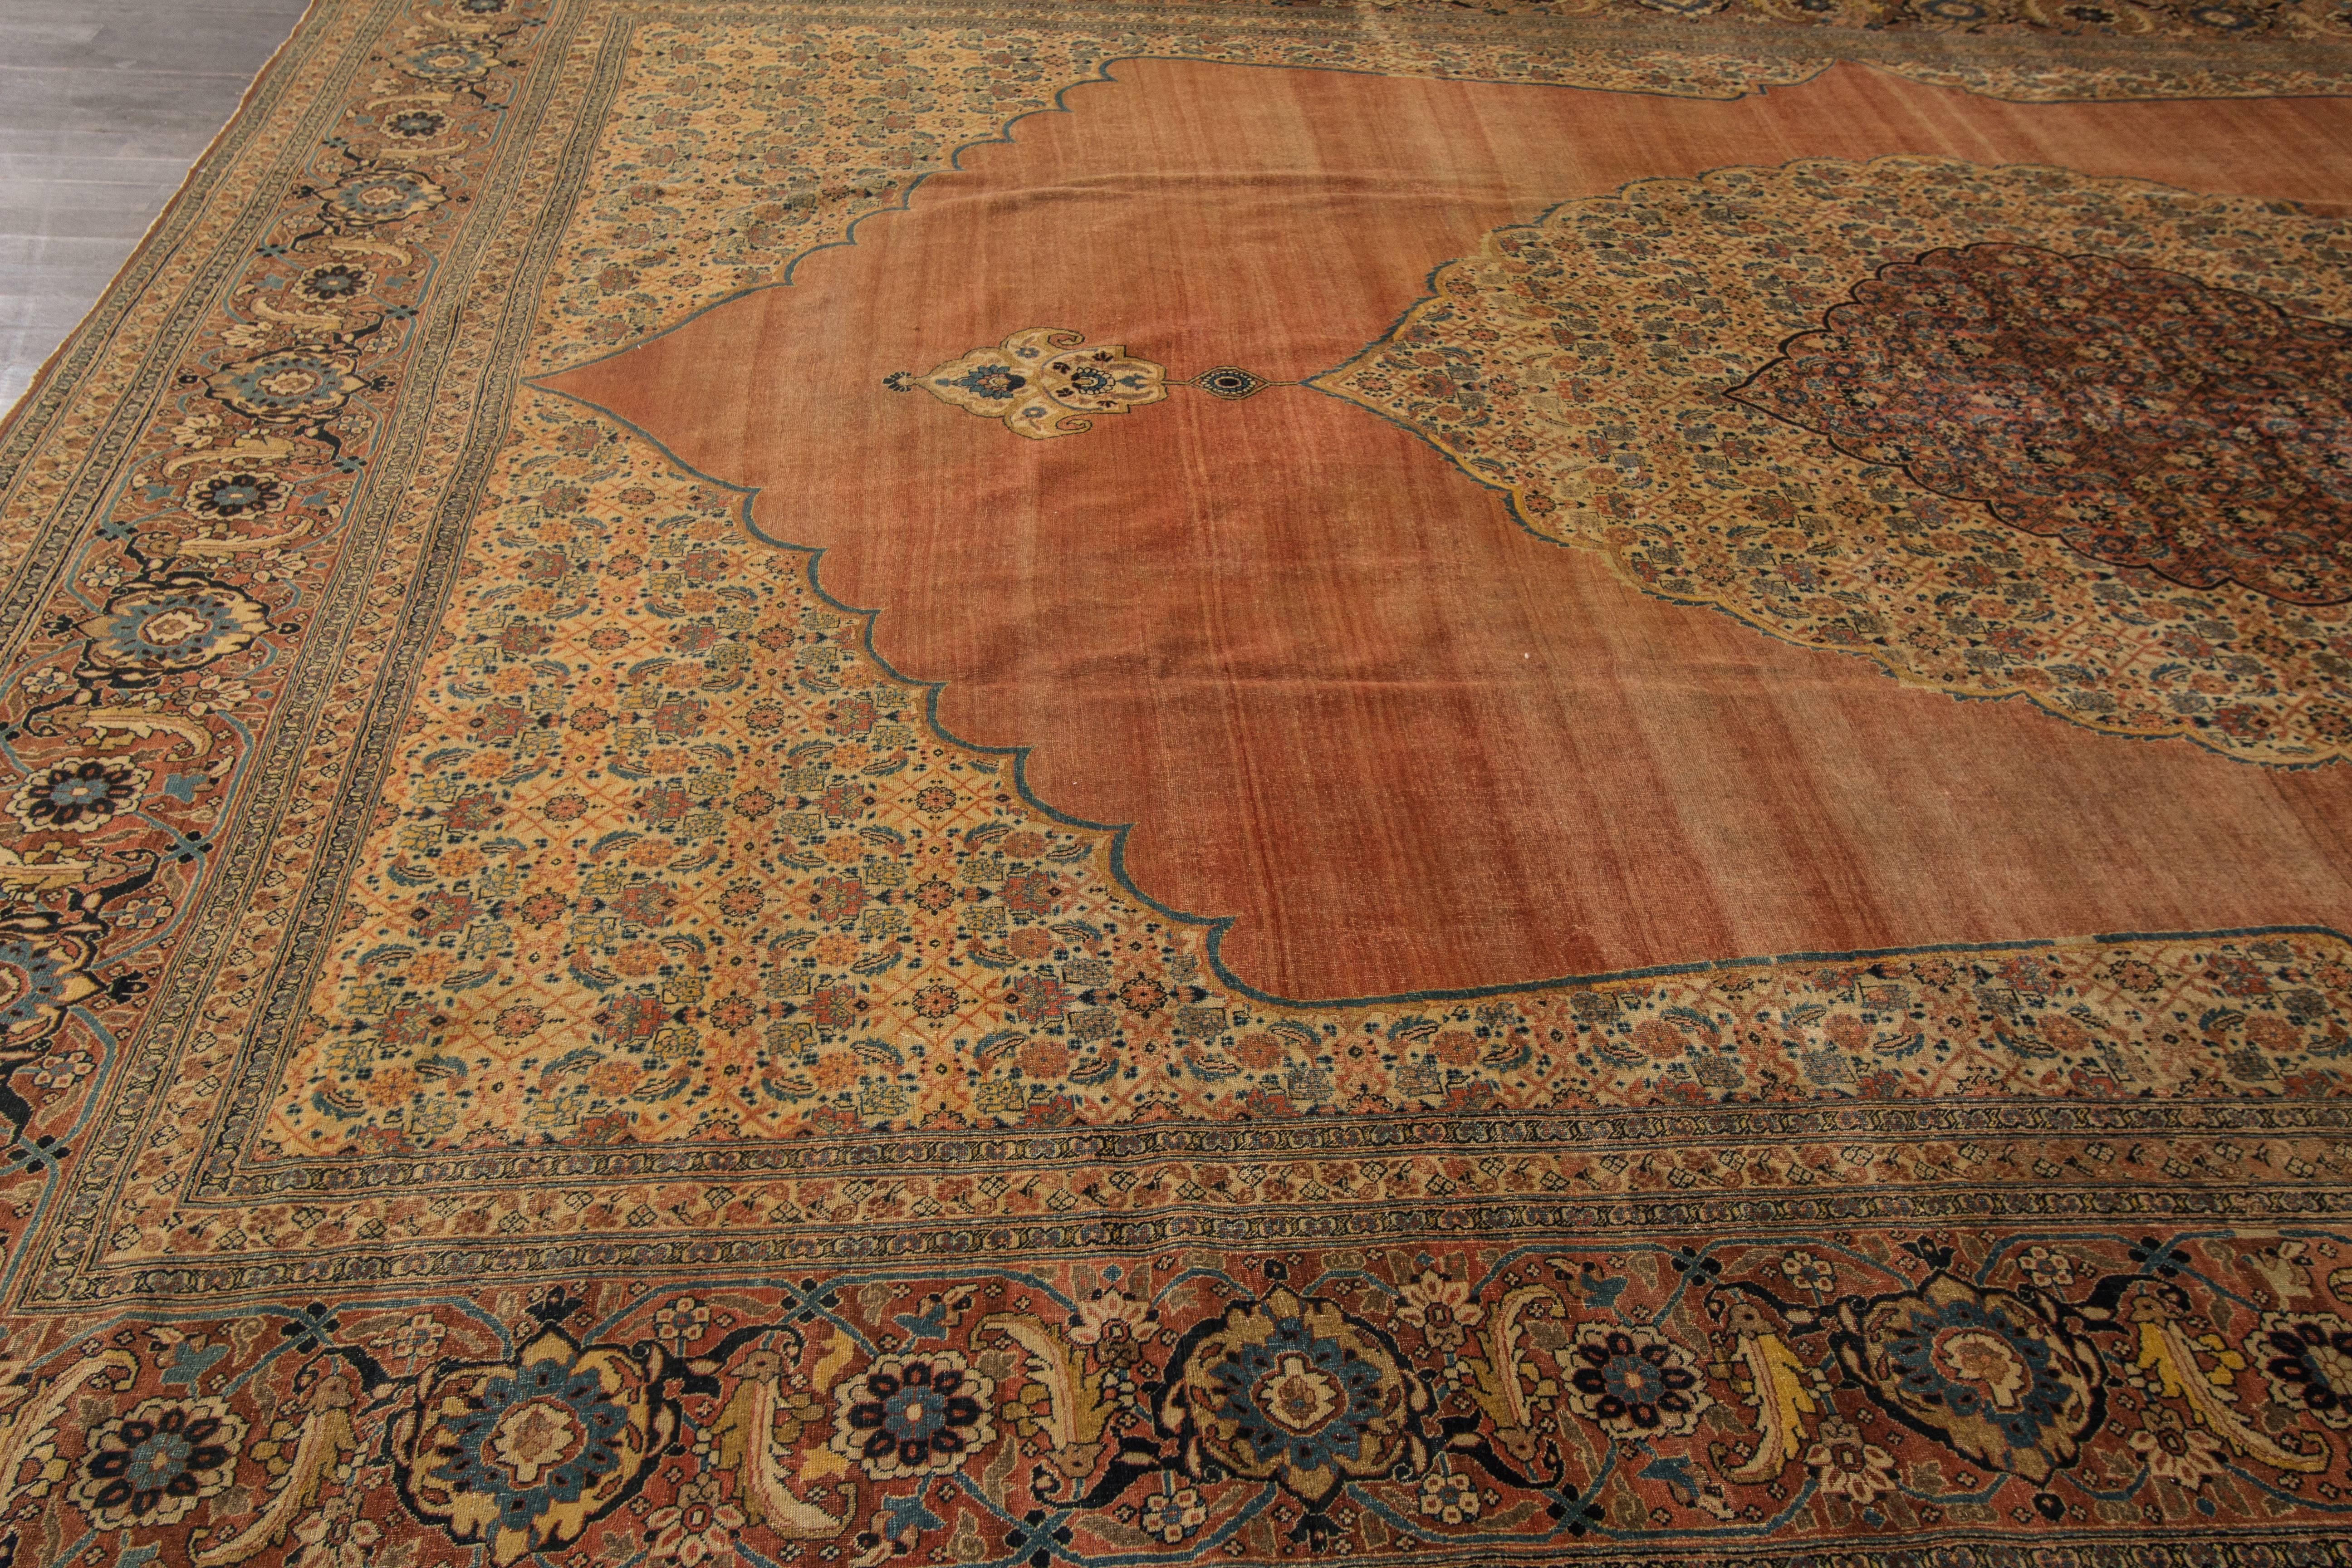 Simply Beautiful Antique Persian Tabriz Rug In Excellent Condition For Sale In Norwalk, CT